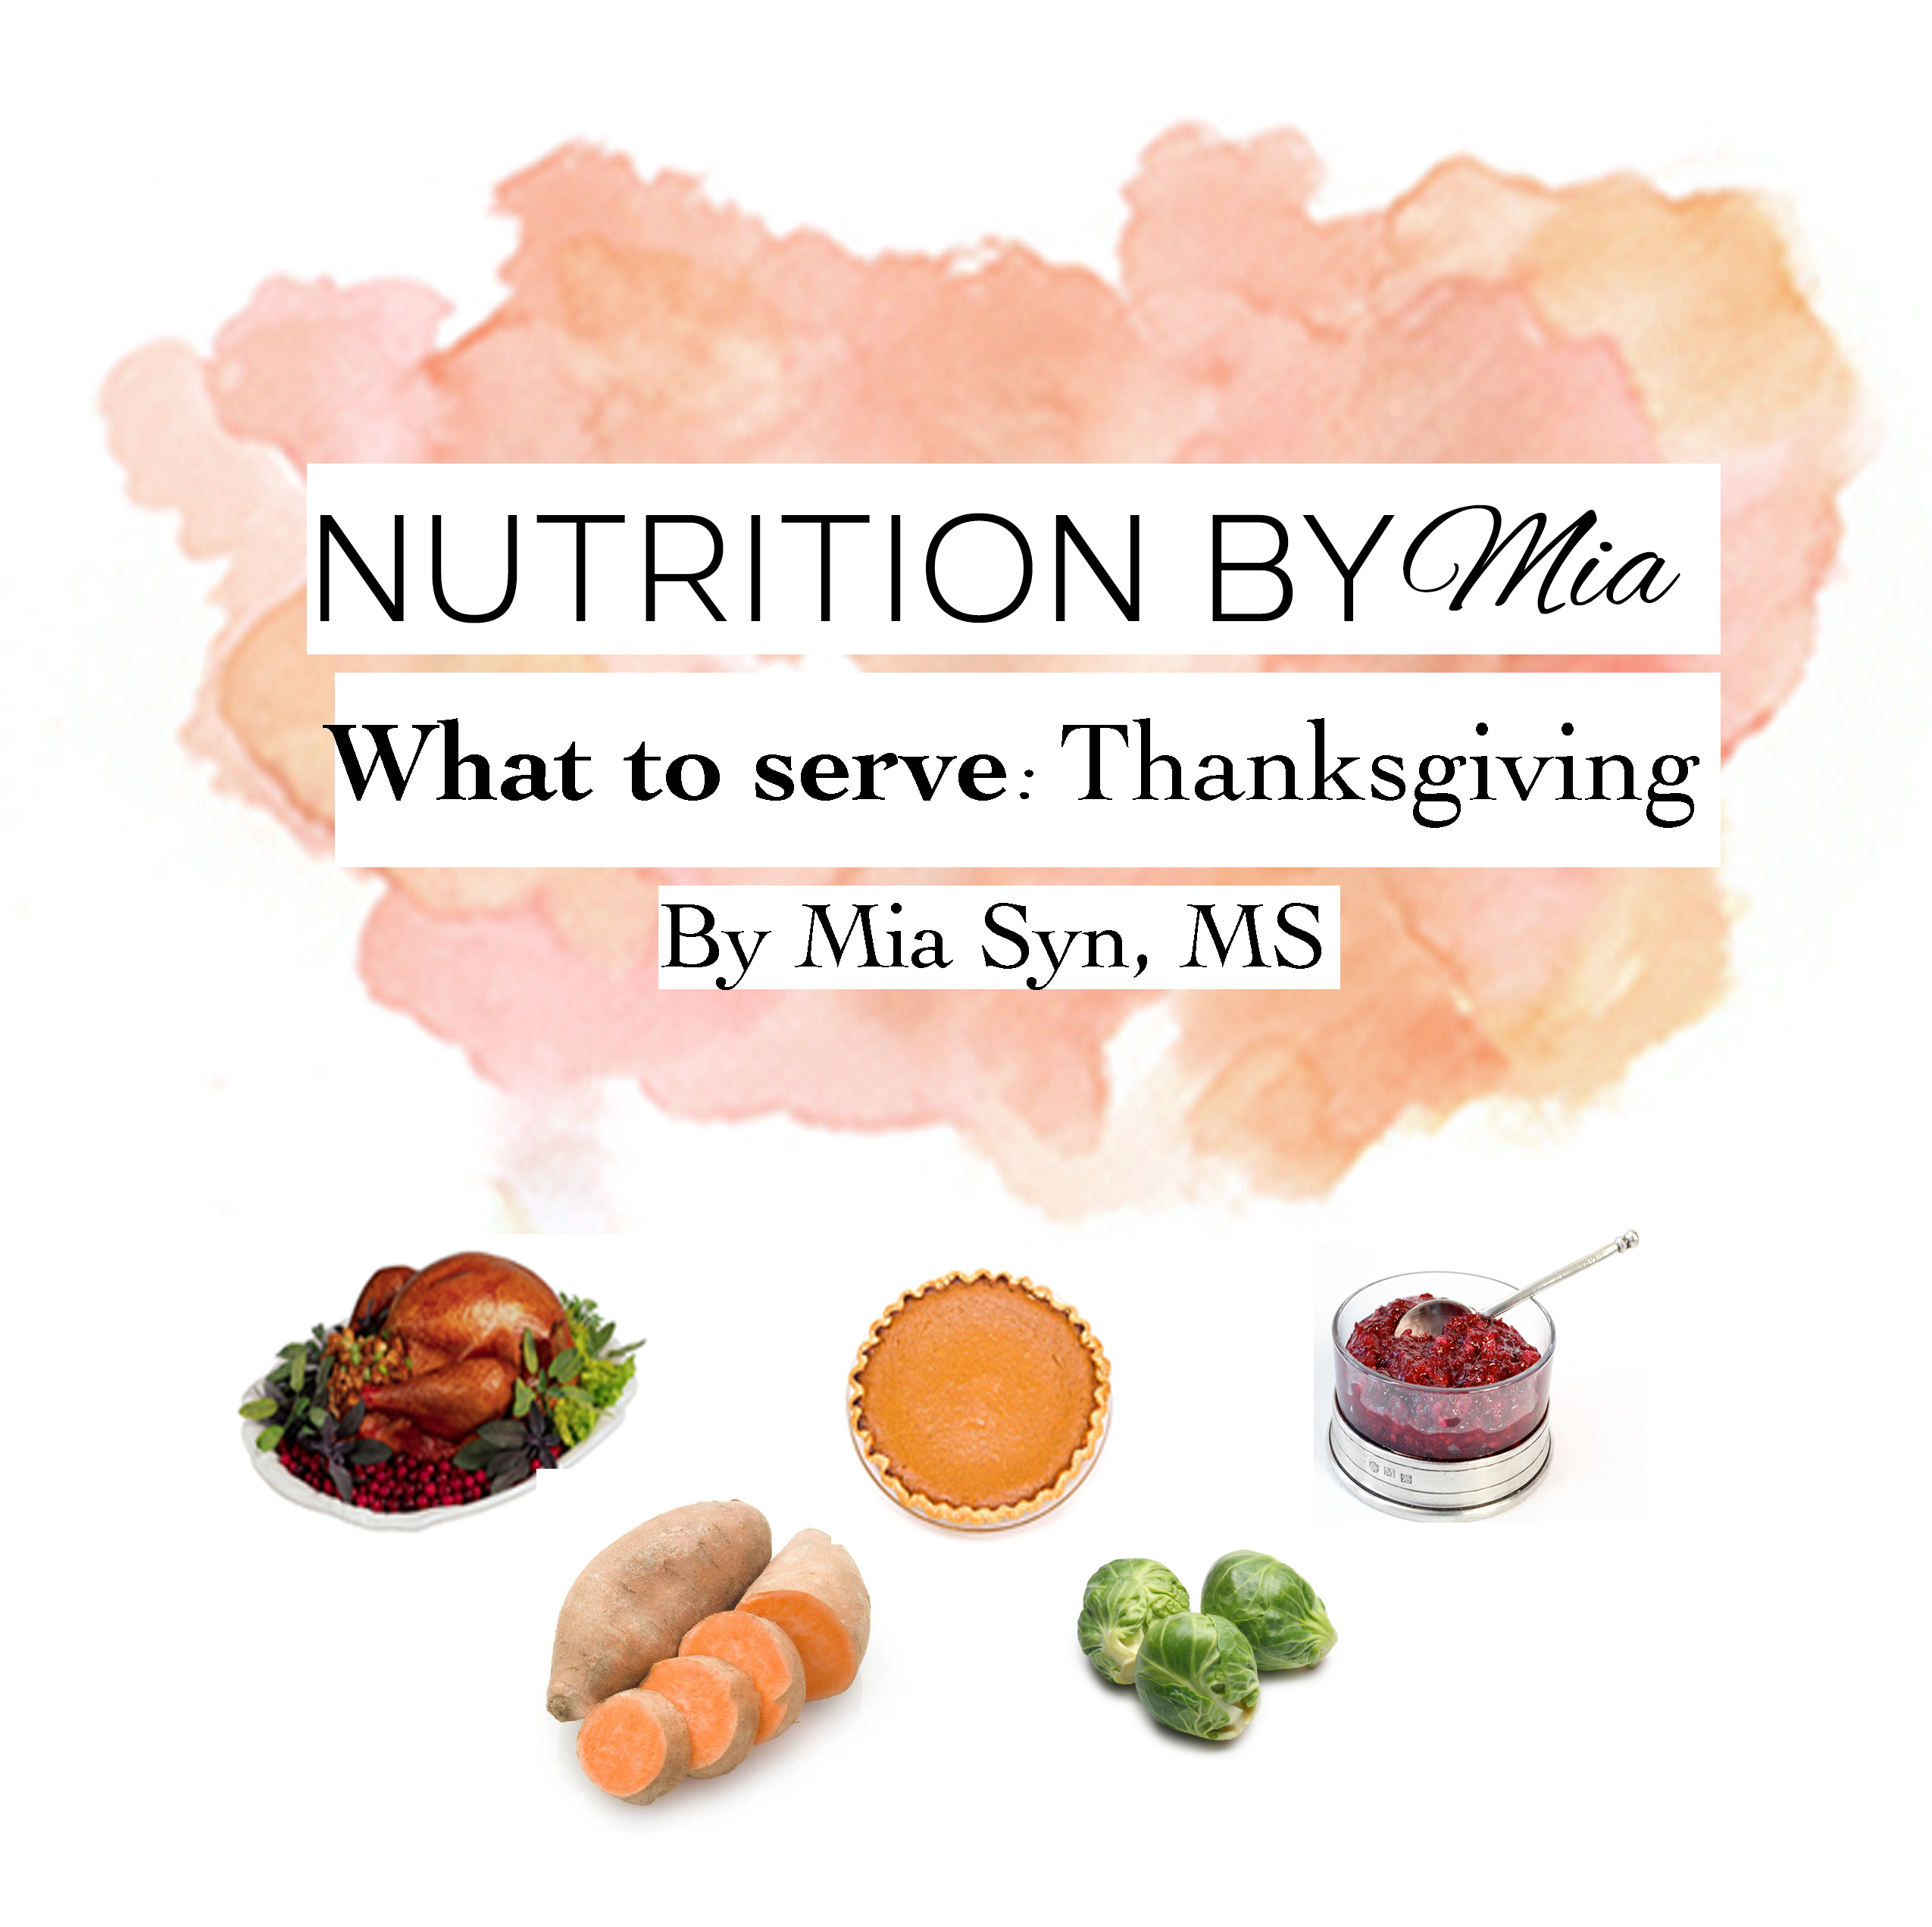 What to serve: Healthy Thanksgiving